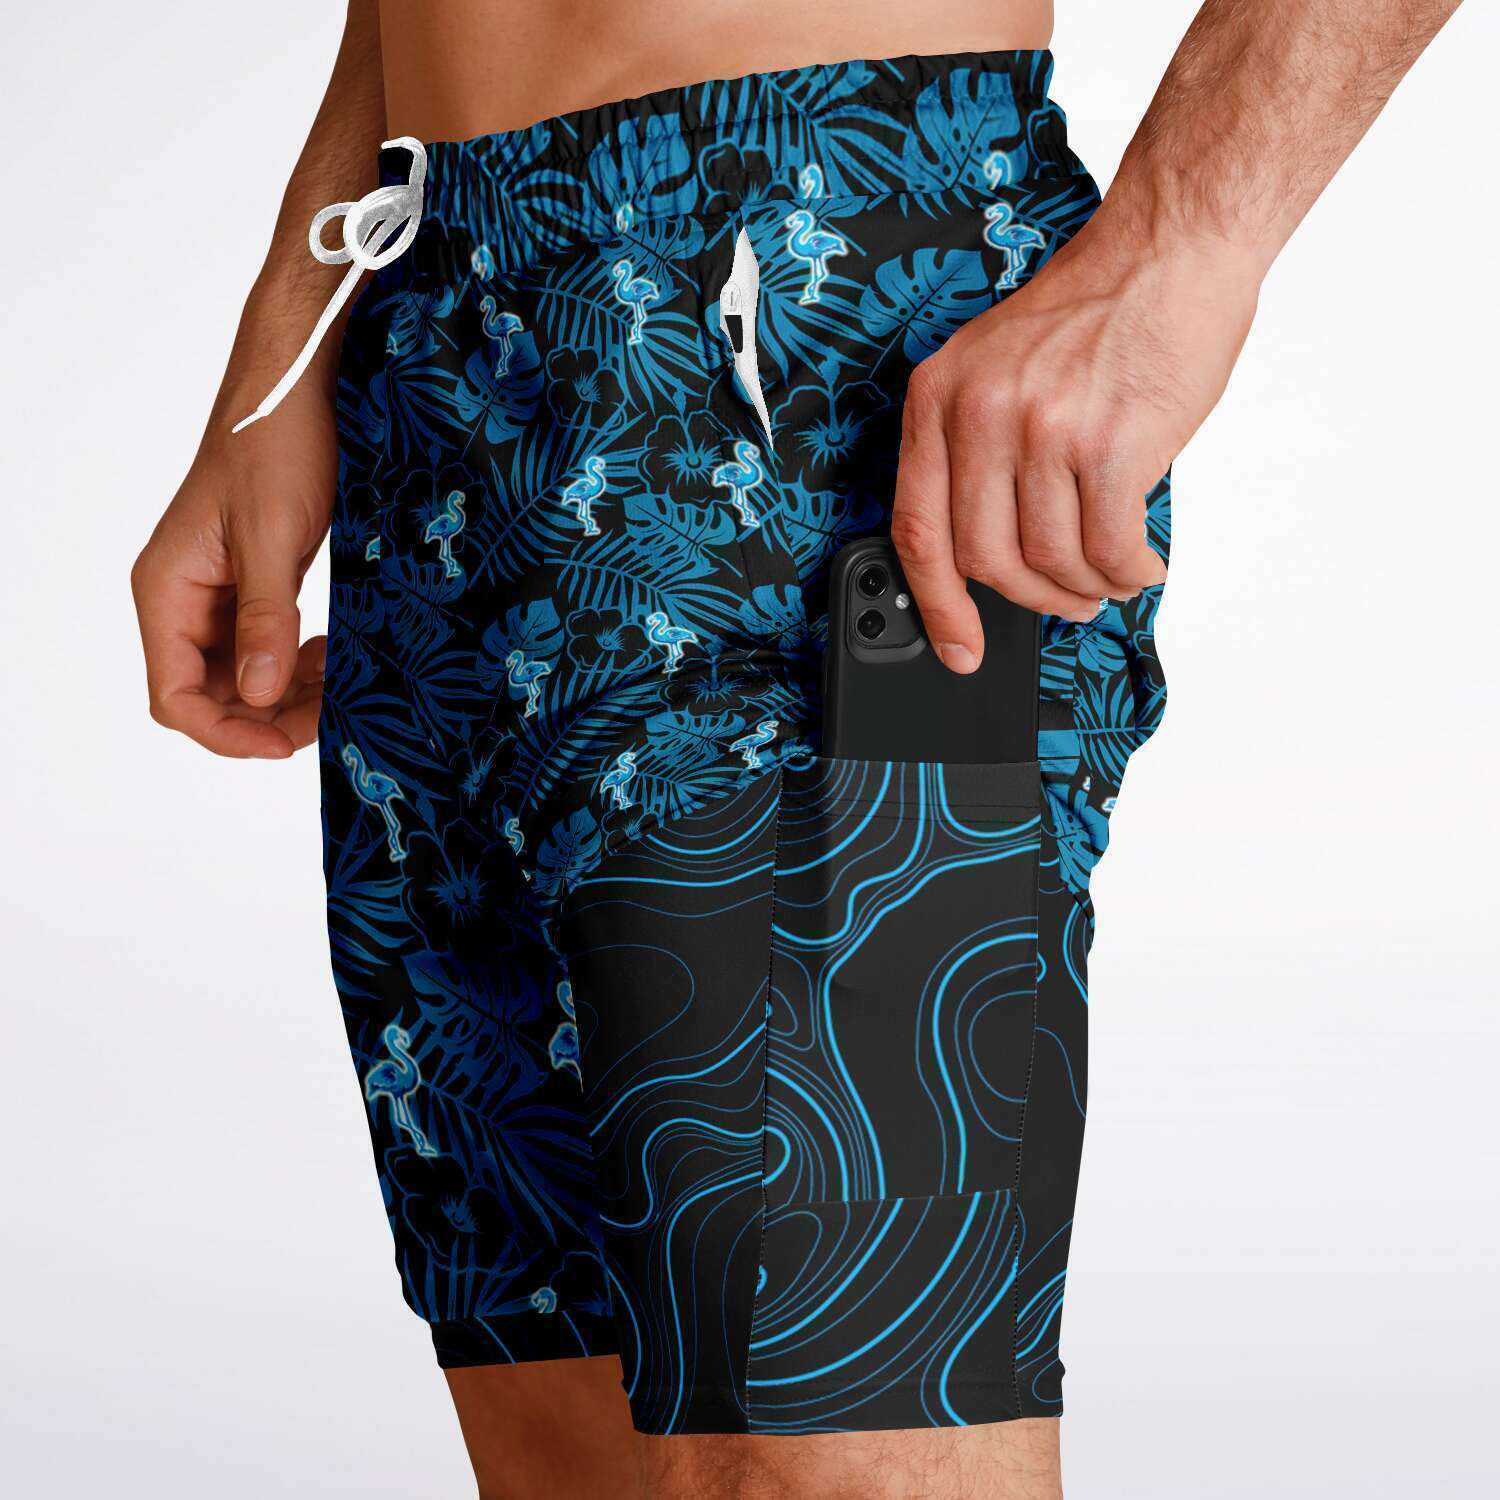 Rad Palm Party Like A Flockstar Men's 2-in-1 Shorts